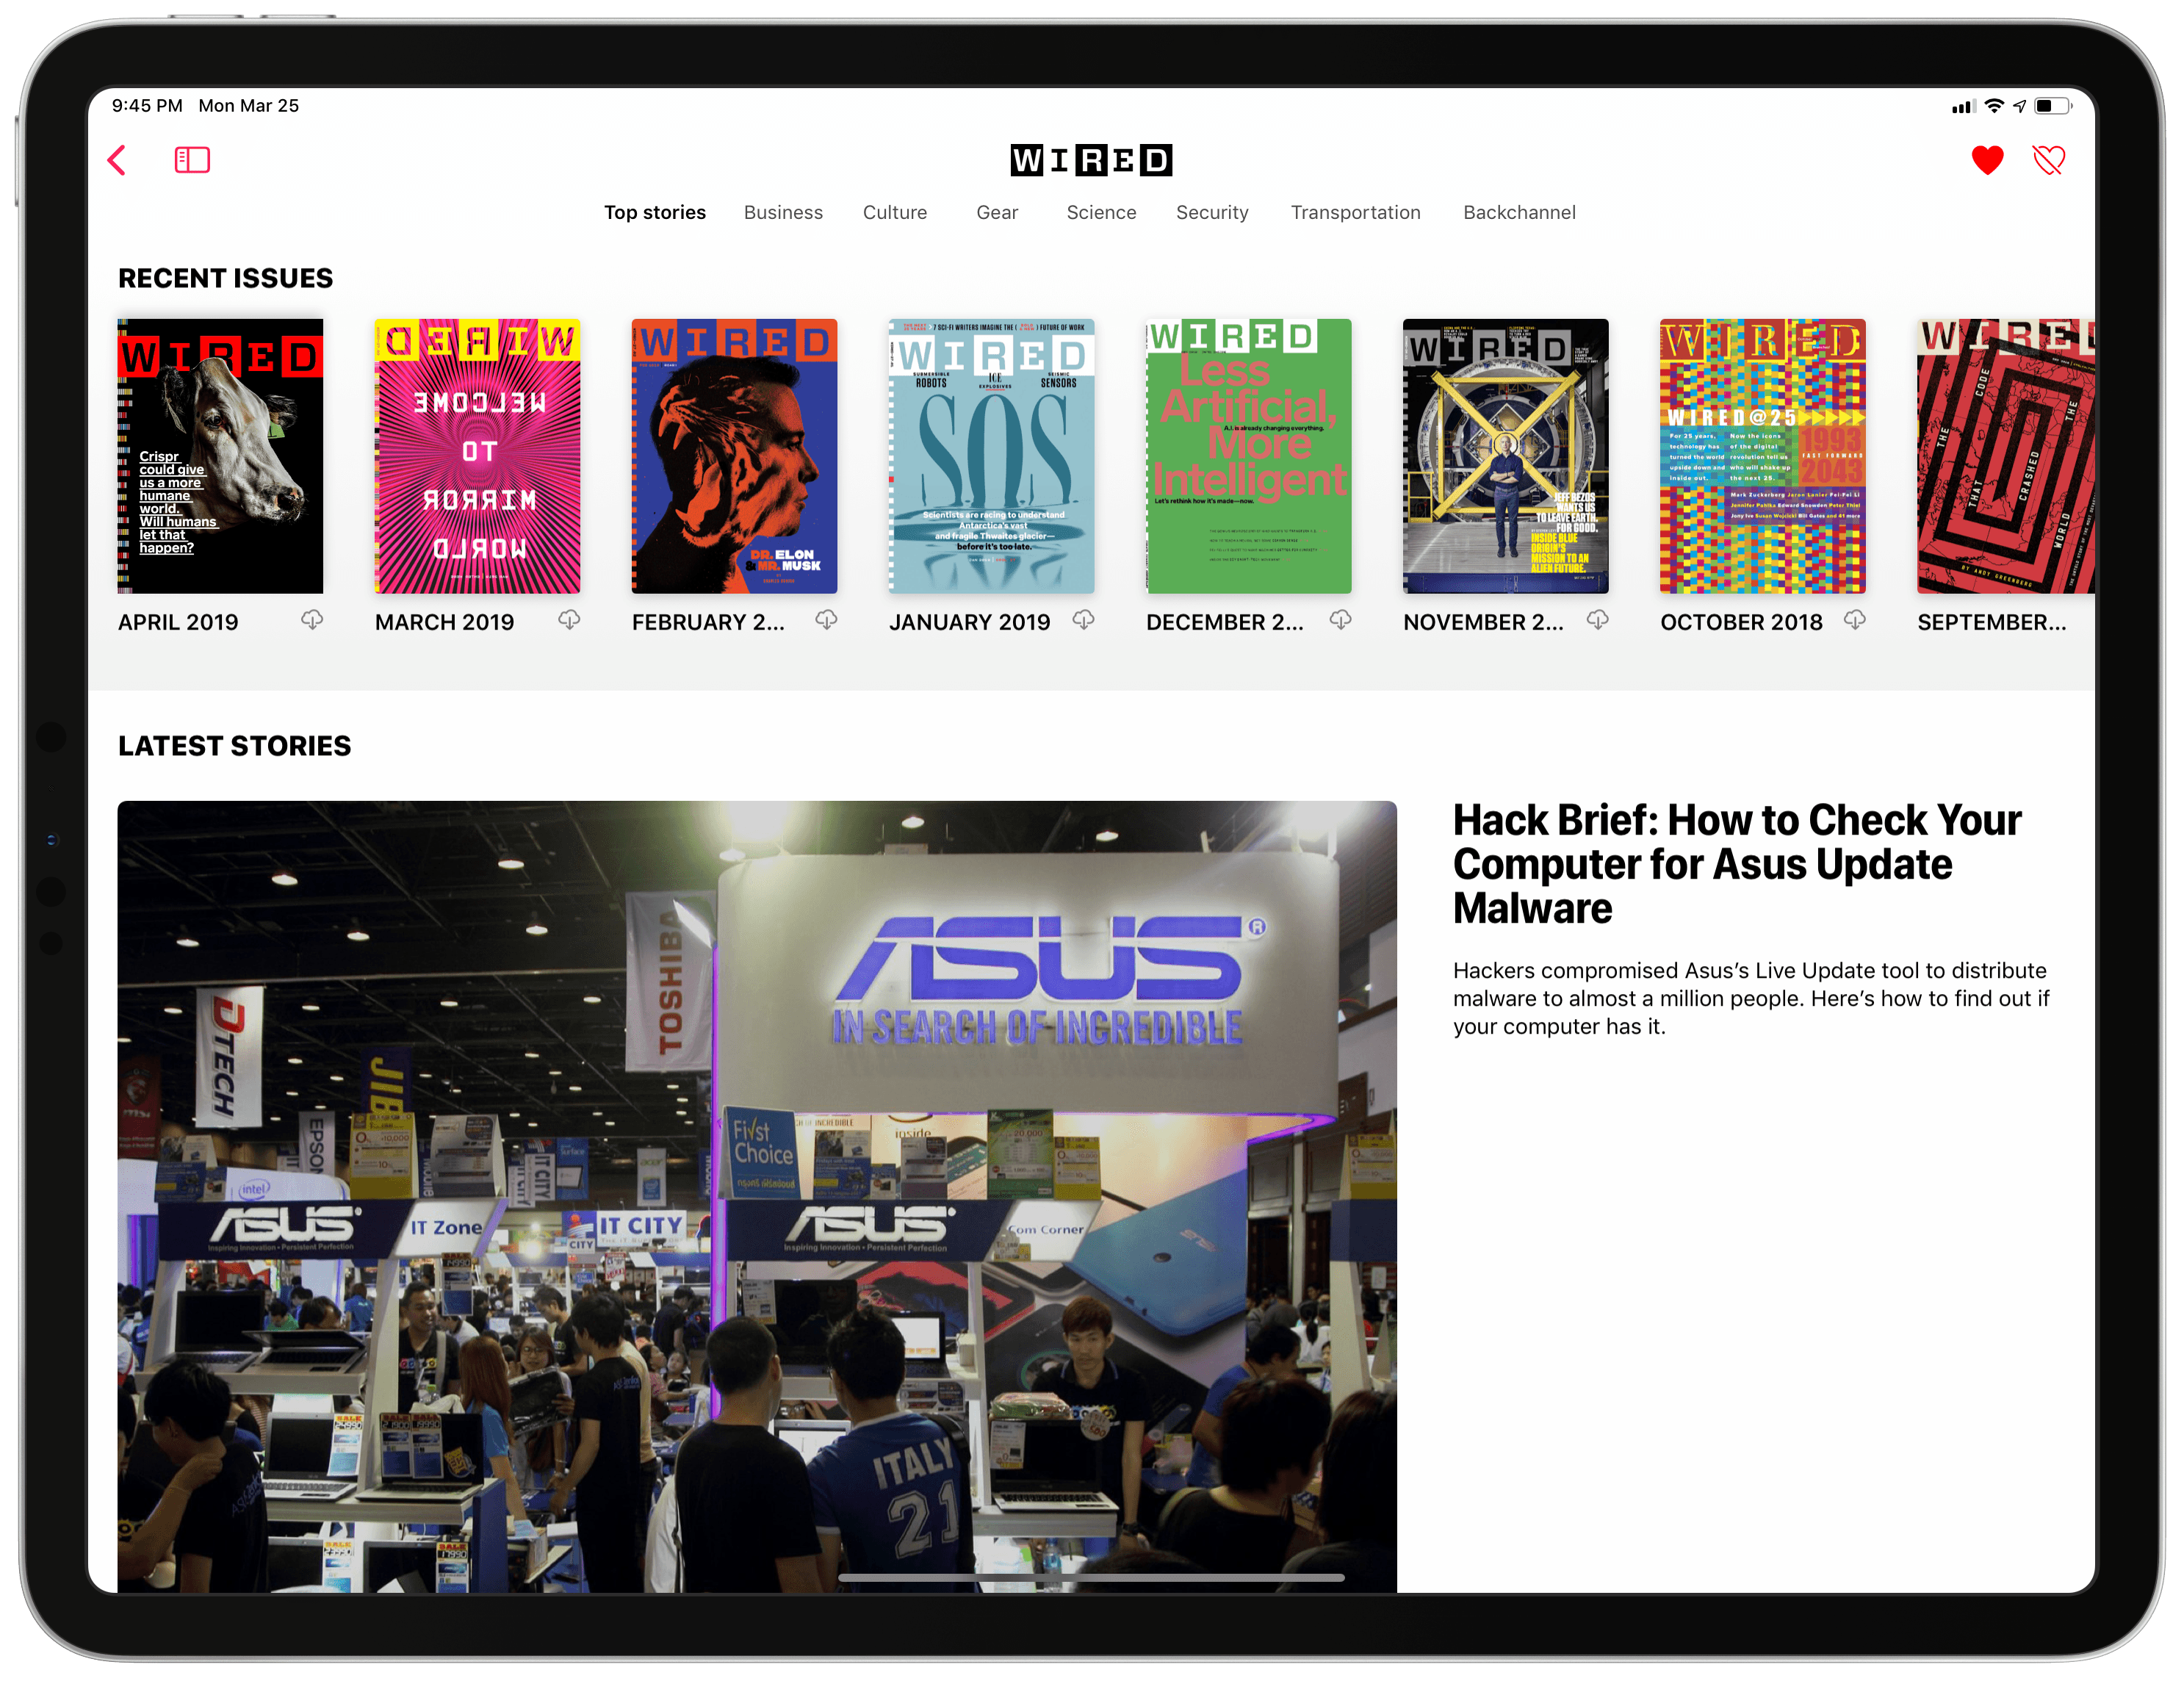 Opening an individual publication's page will show you past issues of the magazines that can be read in Apple News+. The same page can combine website stories with magazine issues.